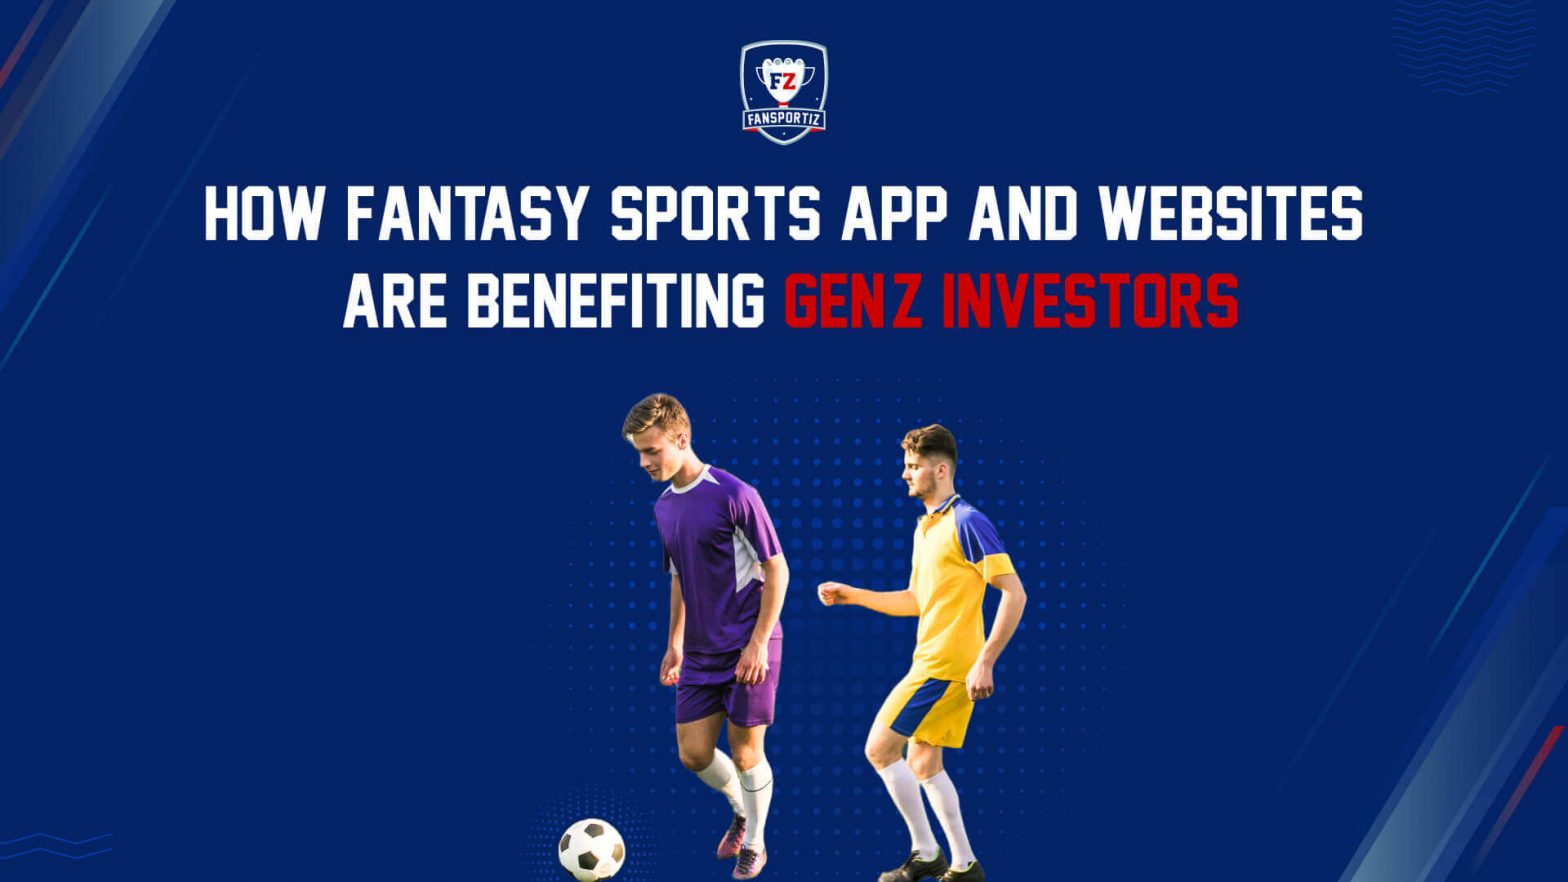 How Fantasy Sports App and Websites are Benefiting Gen-Z investors?